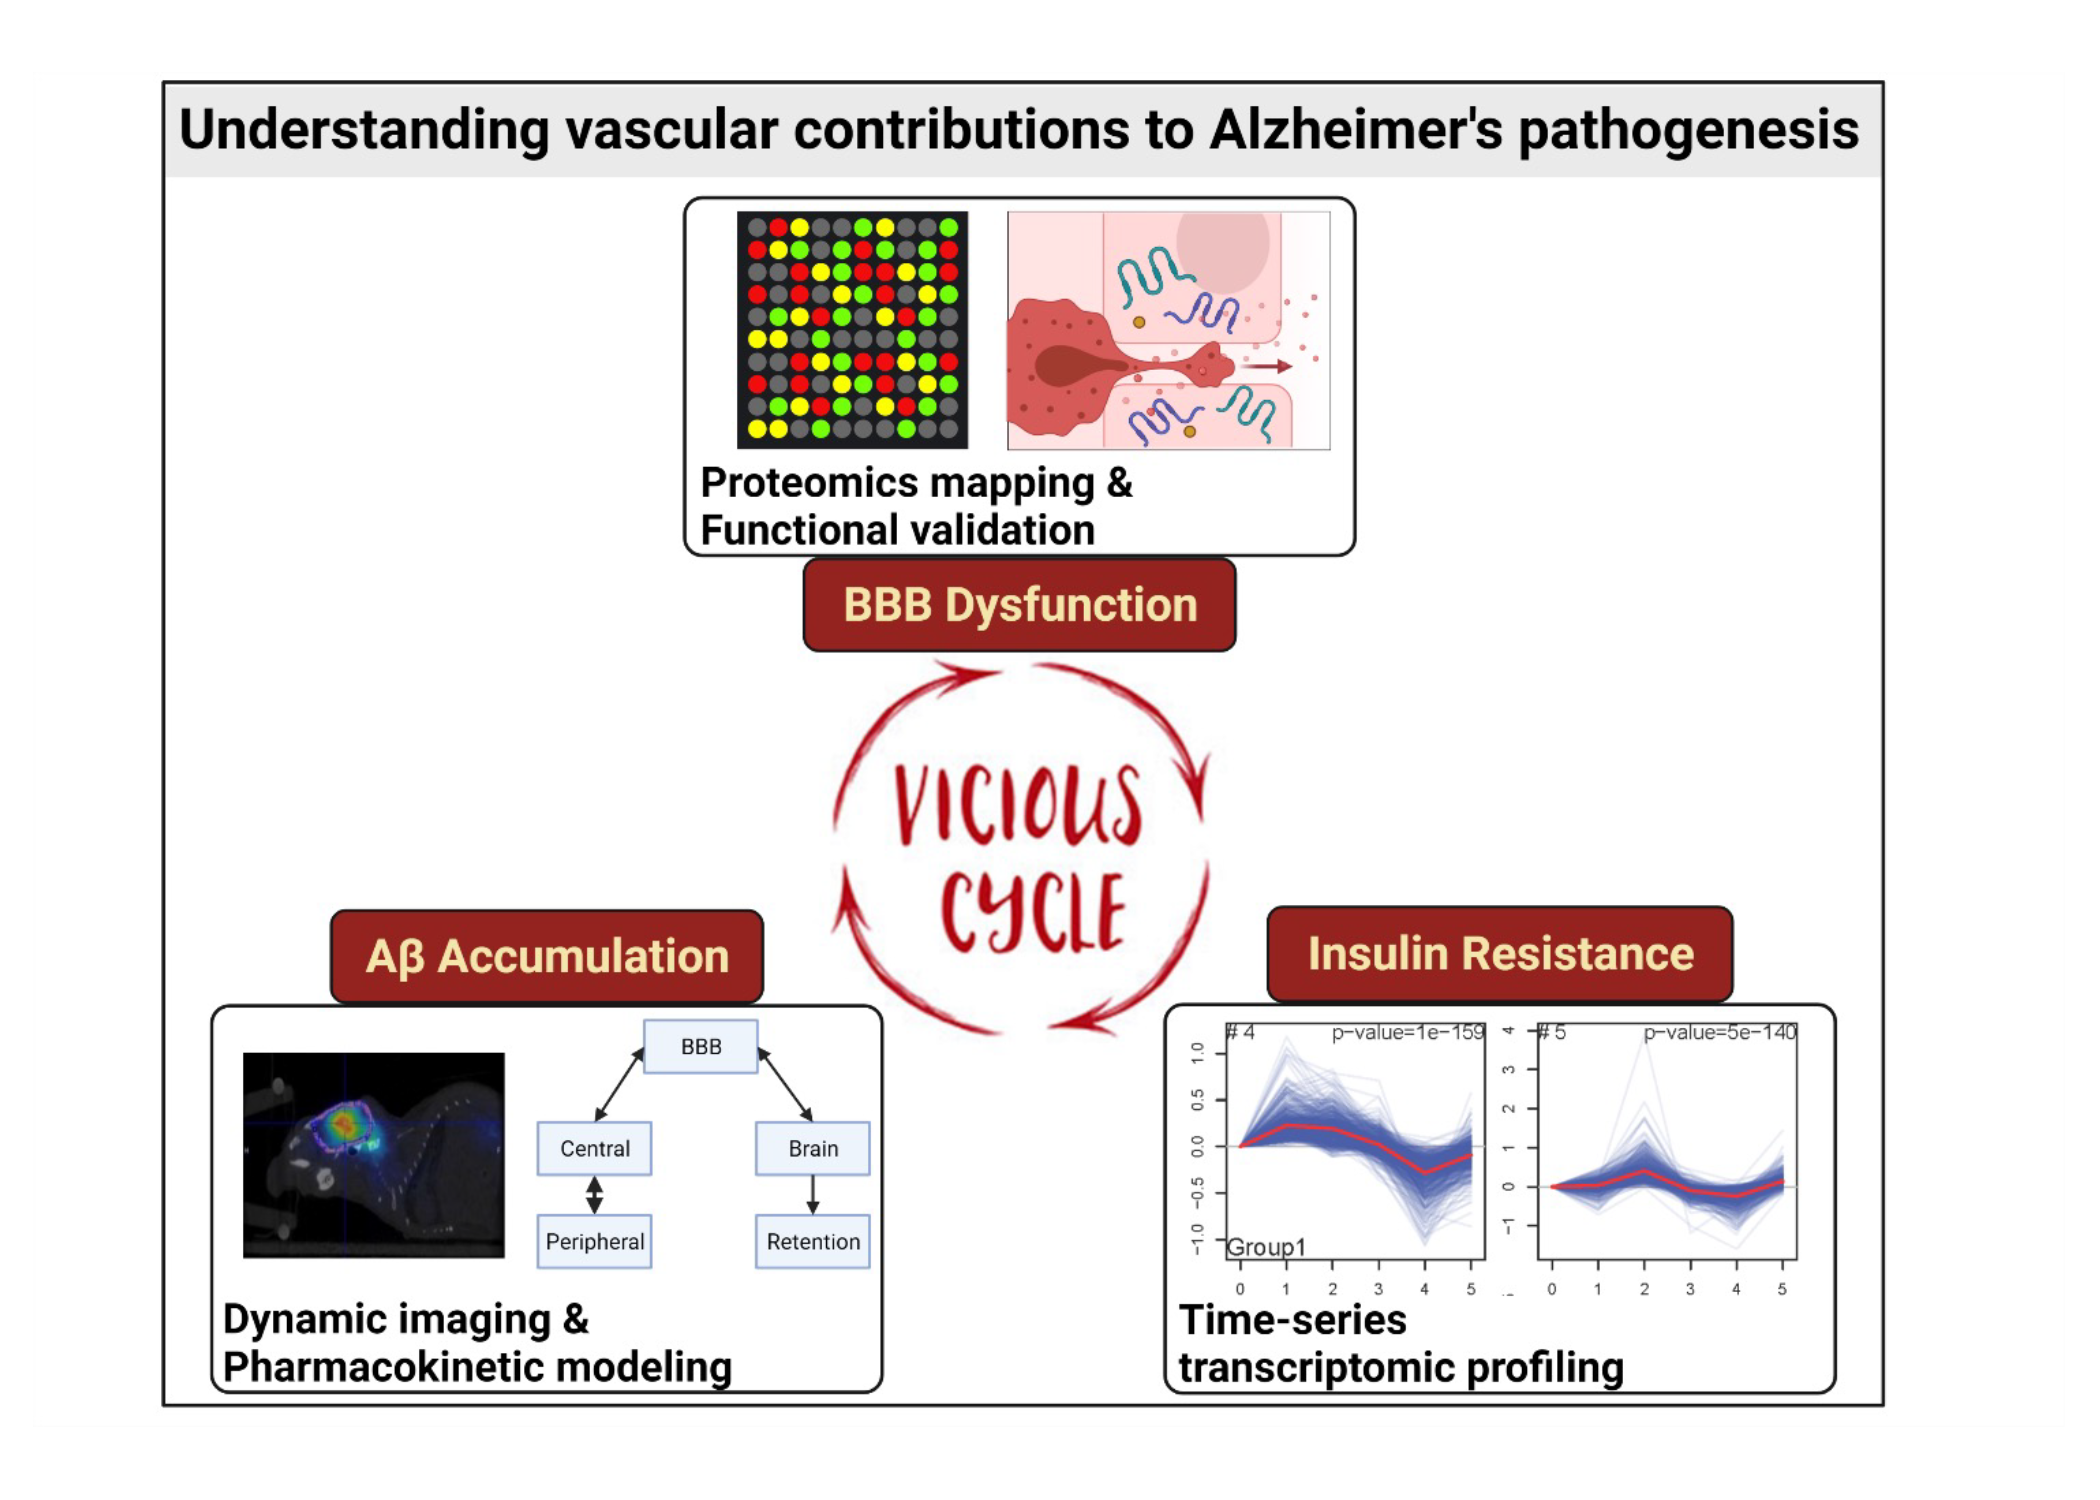 diagram showing cycle of vascular contributions to Alzheimer's pathogenesis